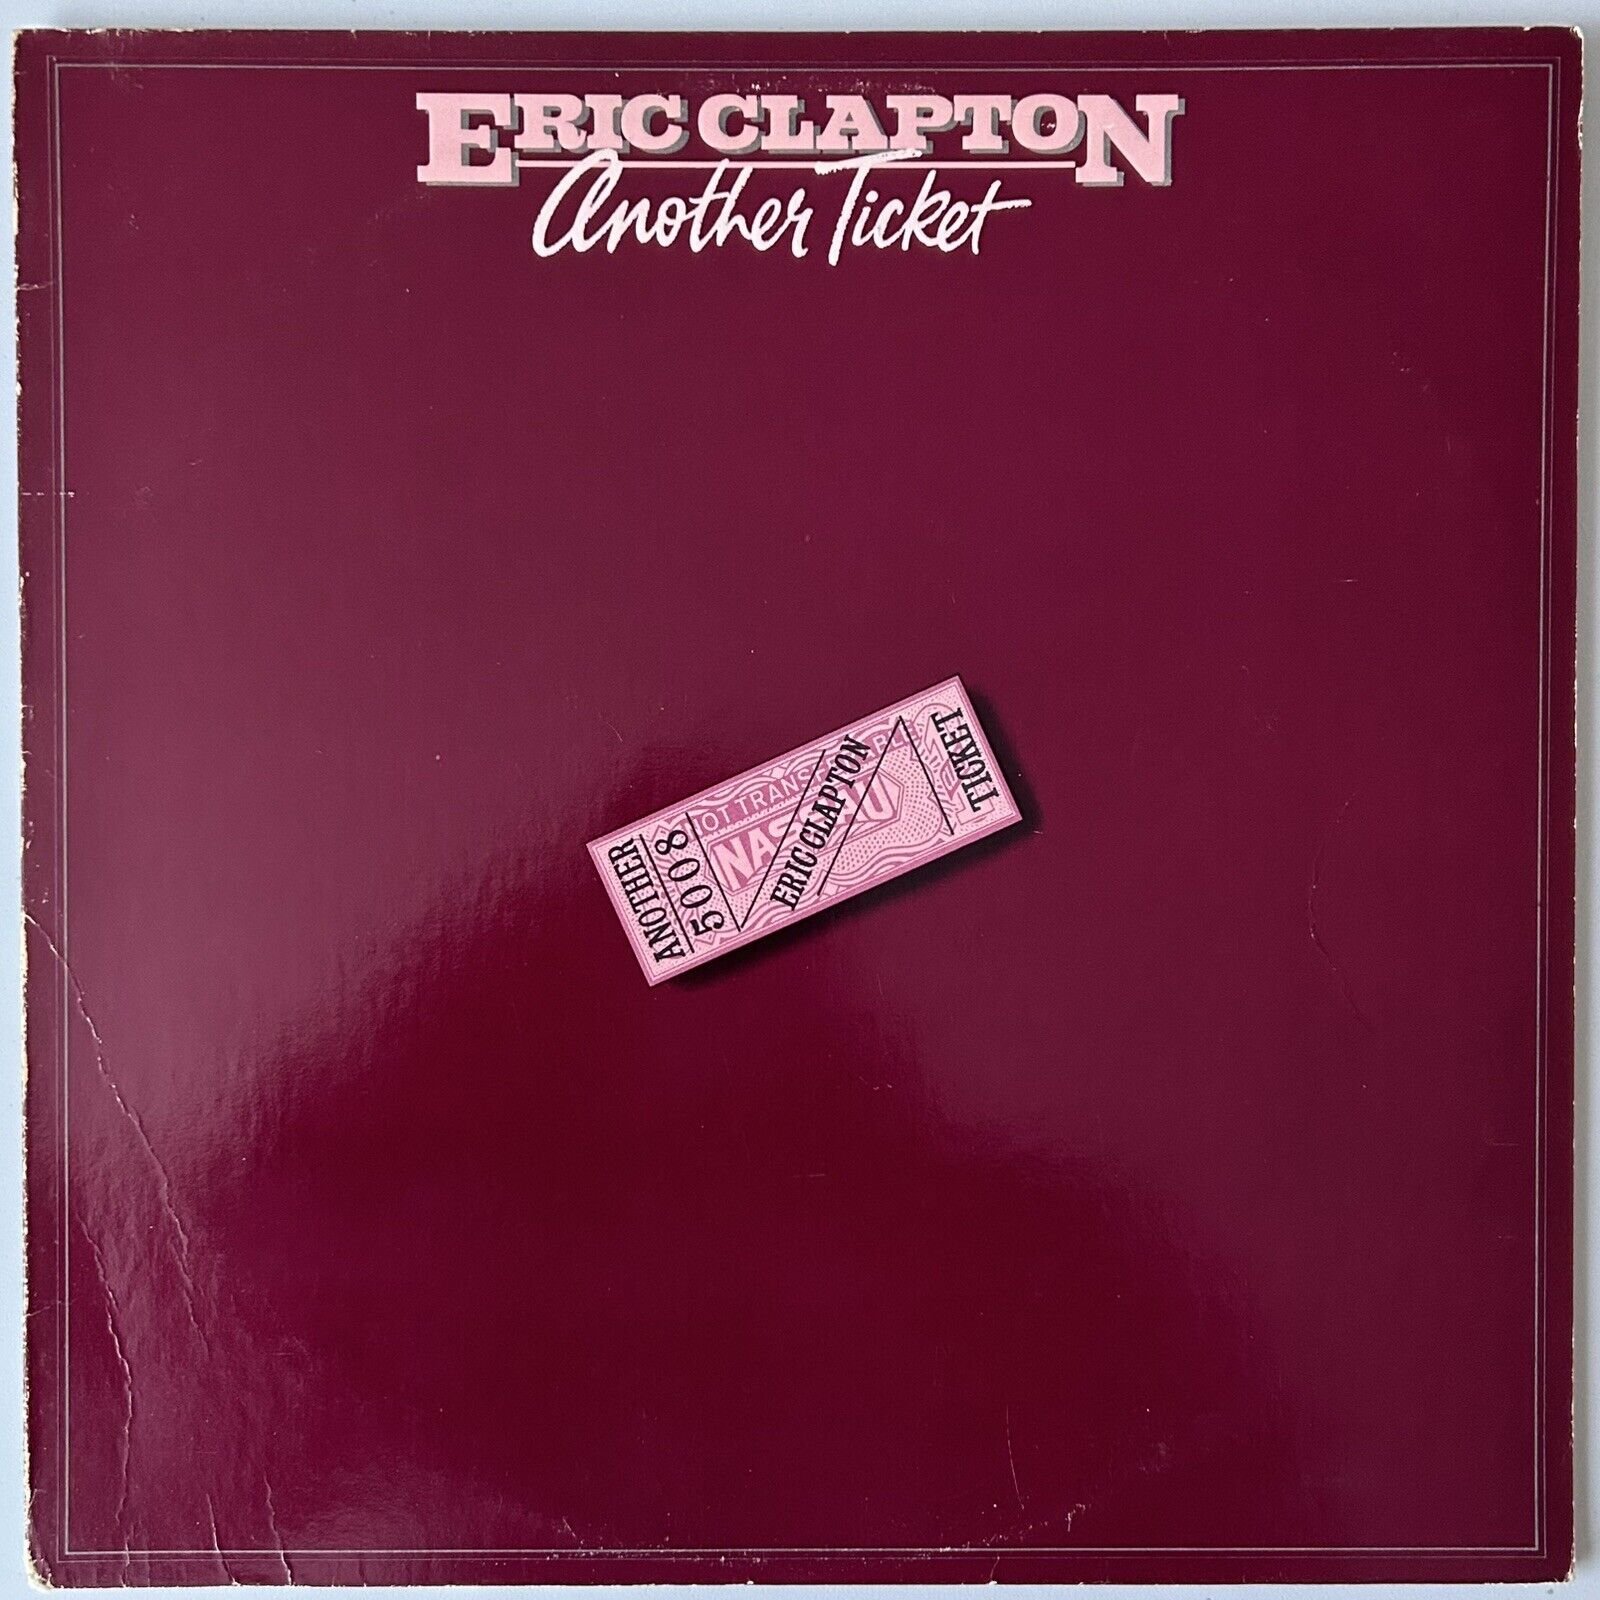 Eric Clapton And His Band - Another Ticket - RX-1-3095 1981  RSO Records - Vinyl